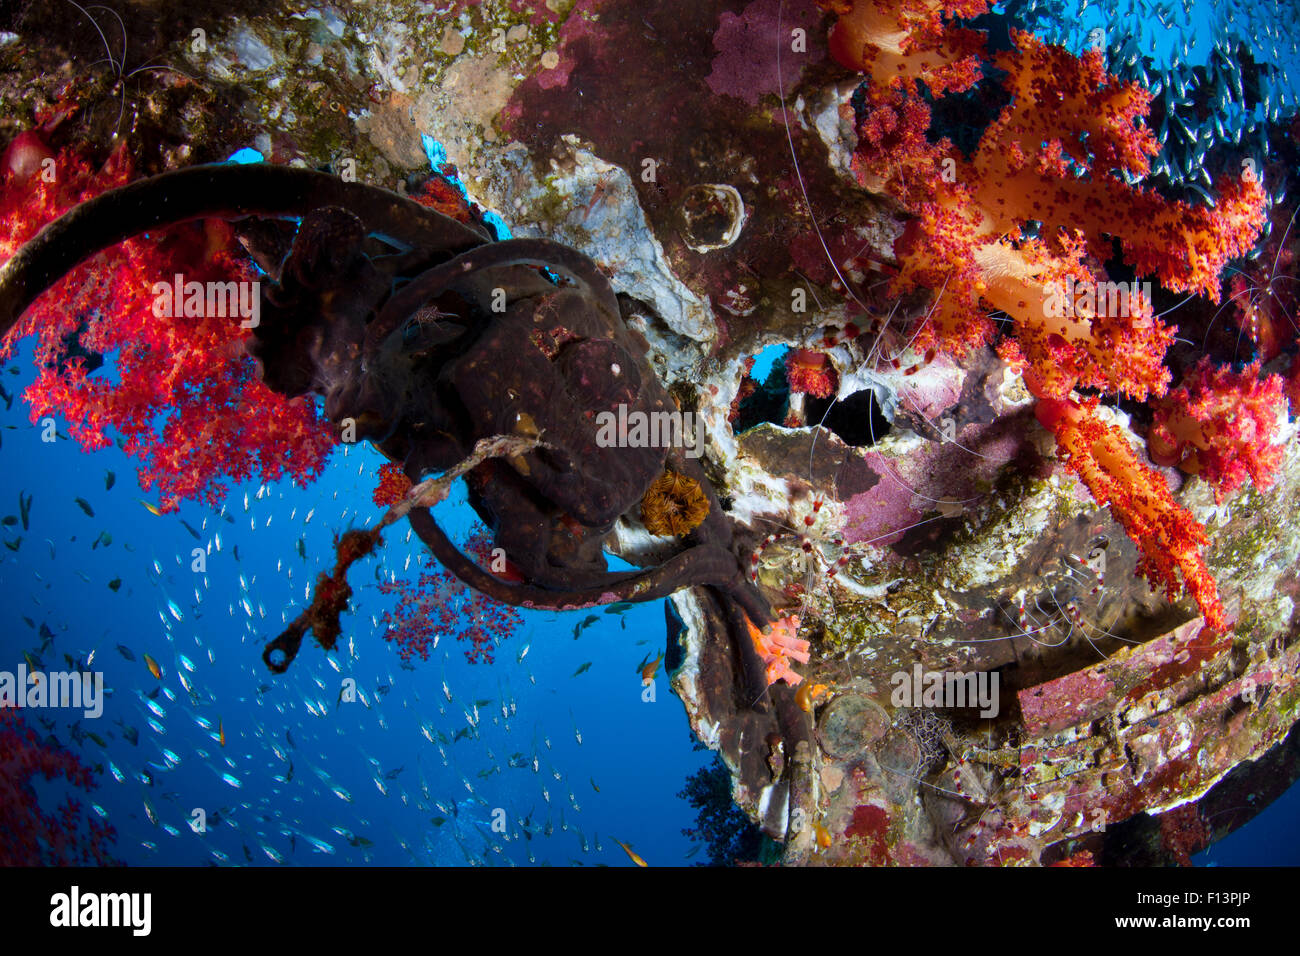 Soft coral, Glassfish and Cleaner Shrimp on a Wreck's Mast Stock Photo